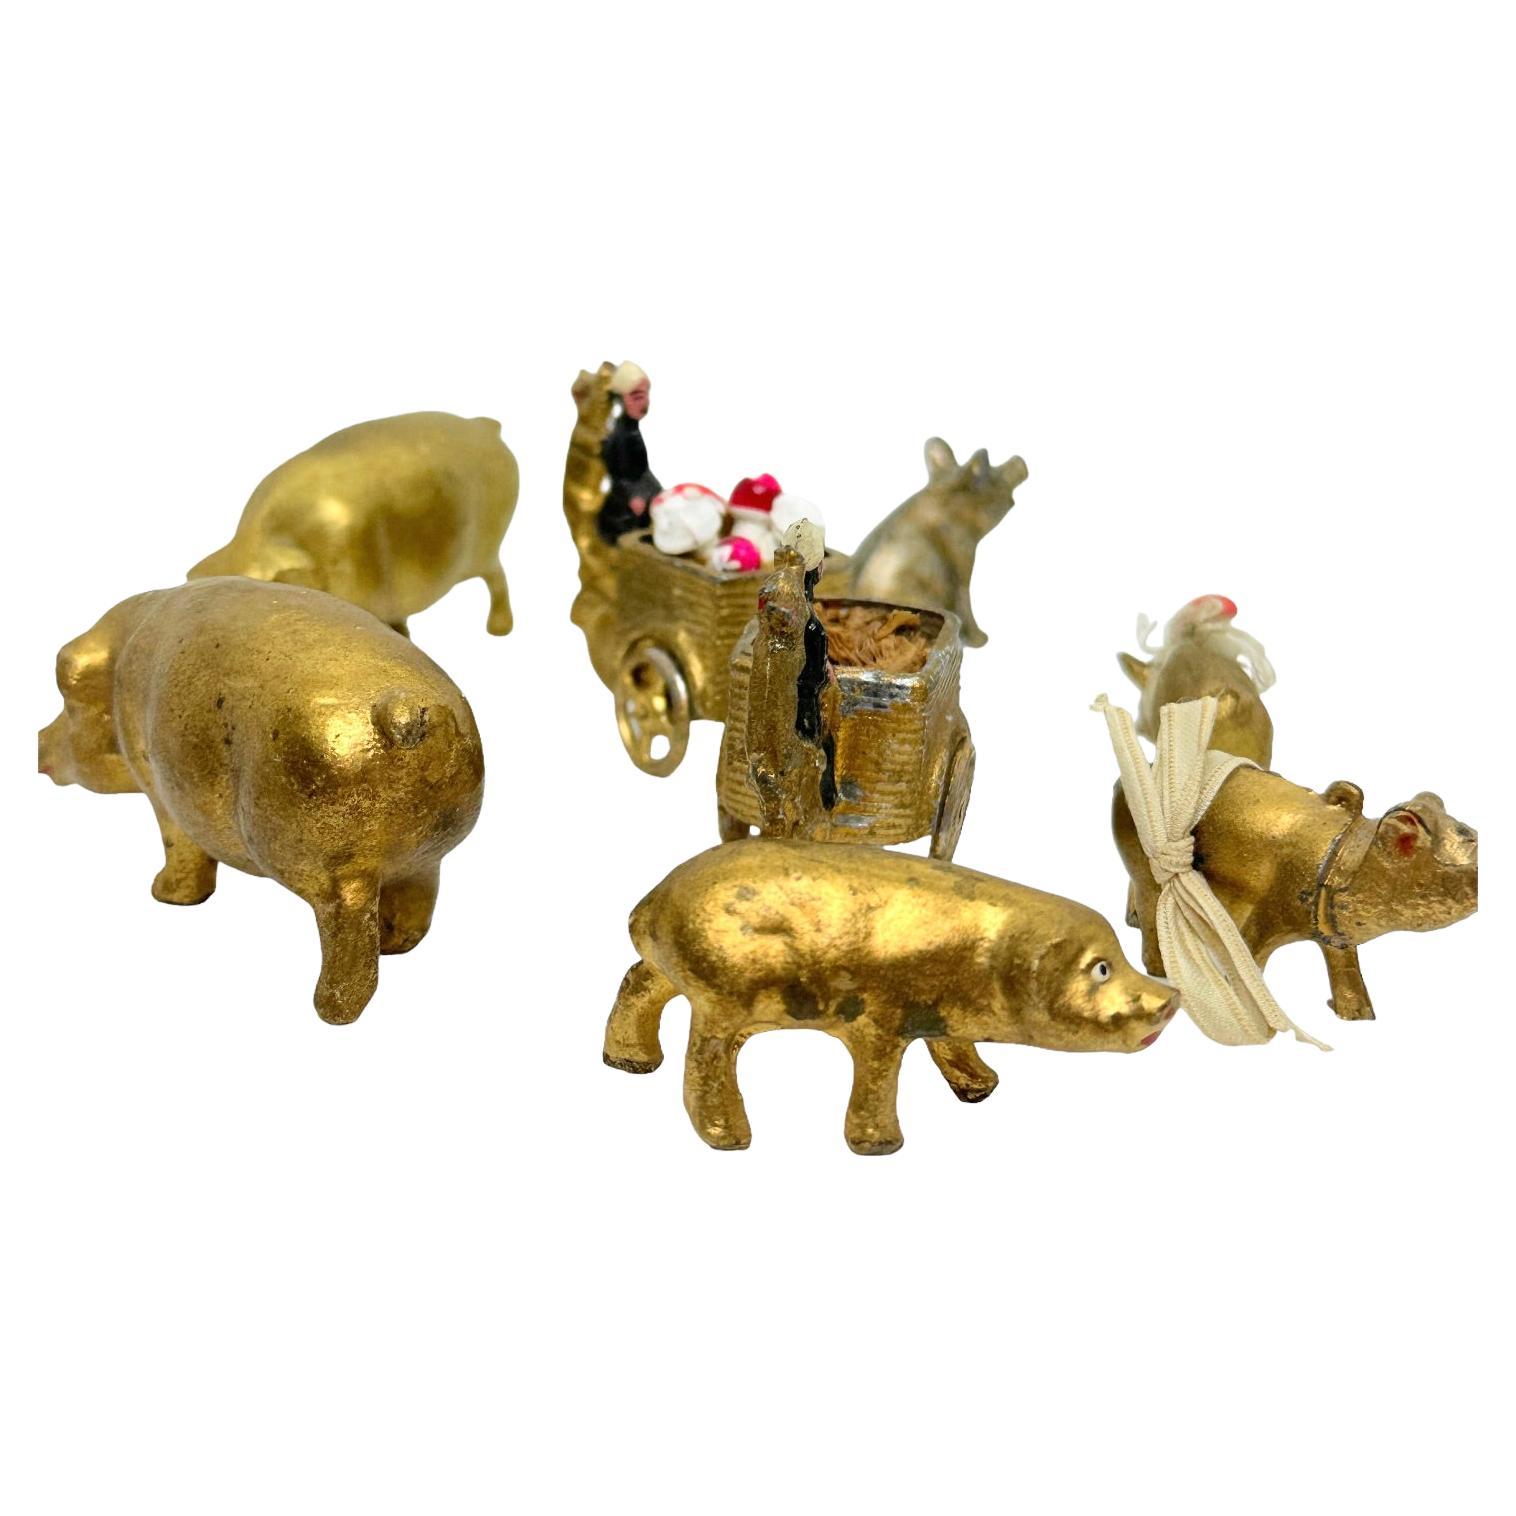 Metal Collection of Pig & Chimney Sweep Lucky Charm Figurines, Antique Austria, 1900s